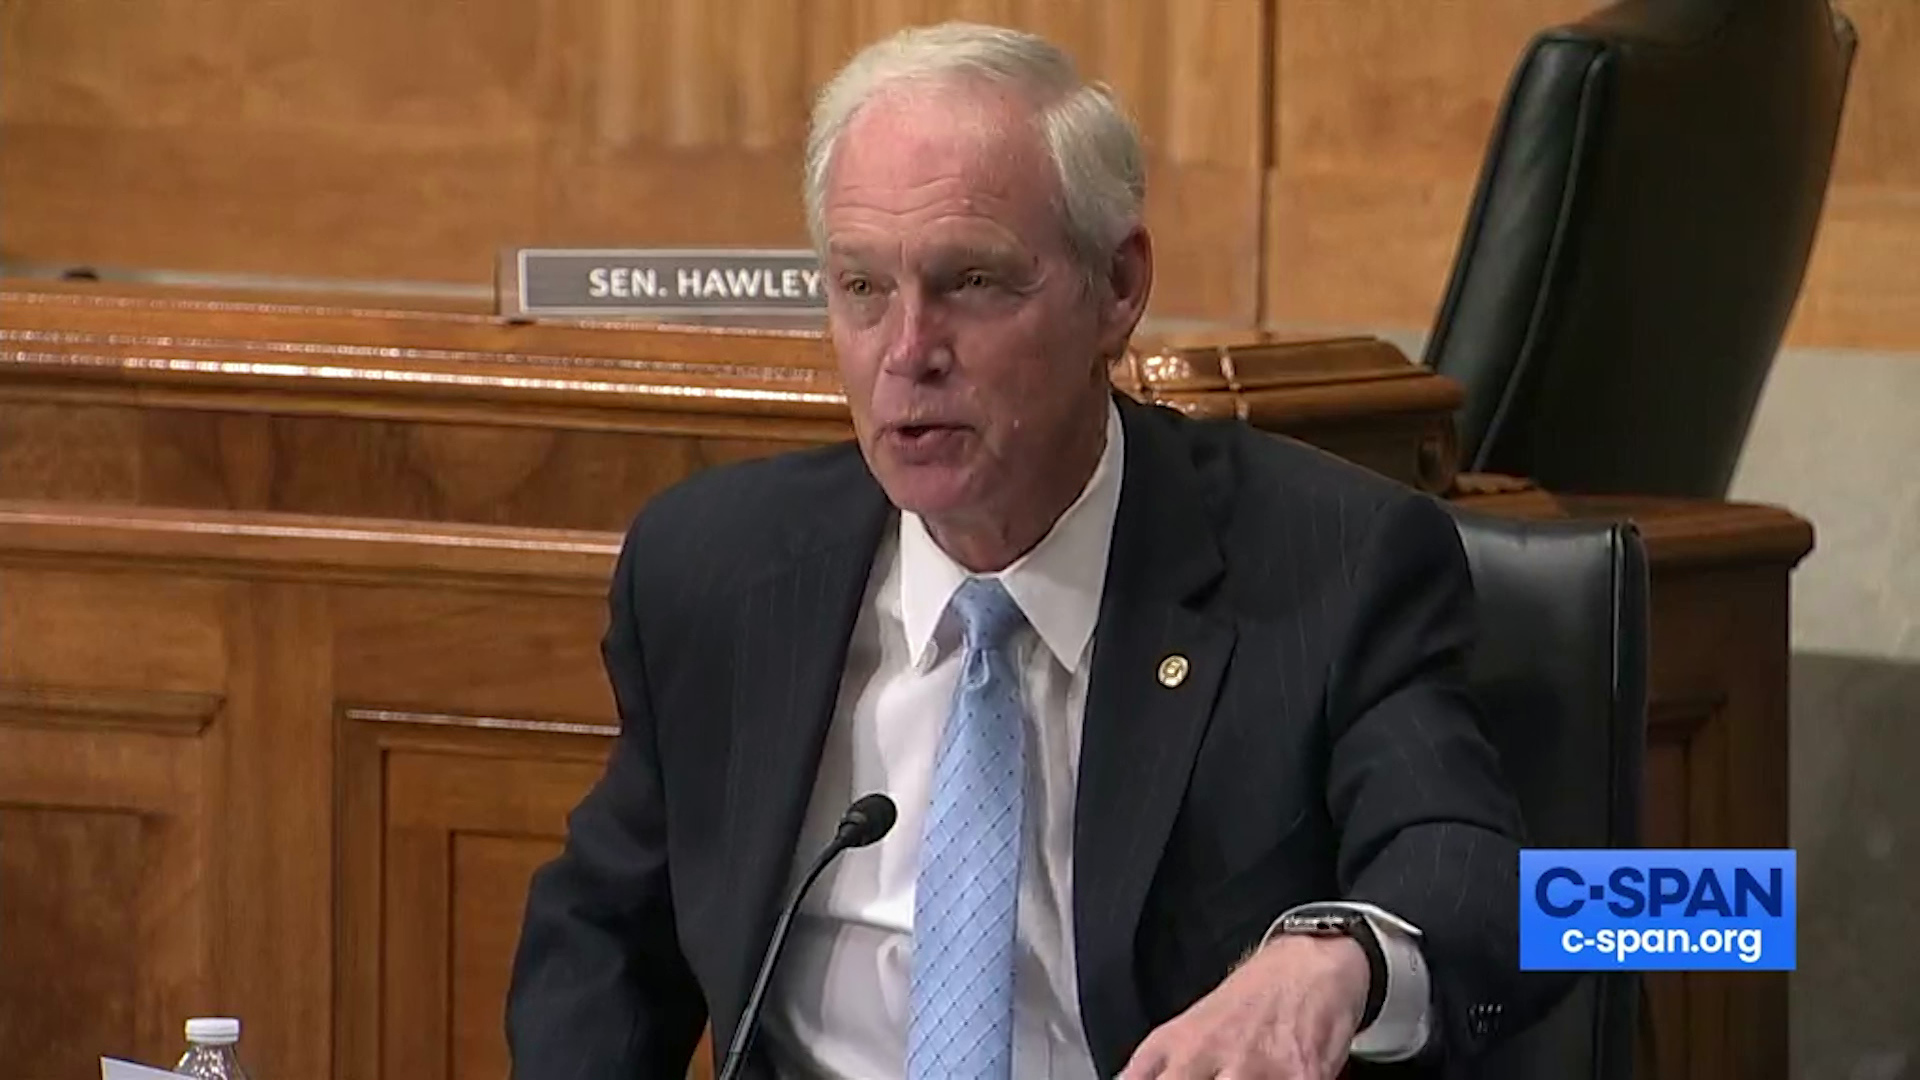 Ron Johnson speaks into a microphone in a legislative hearing room with an empty chair behind him.